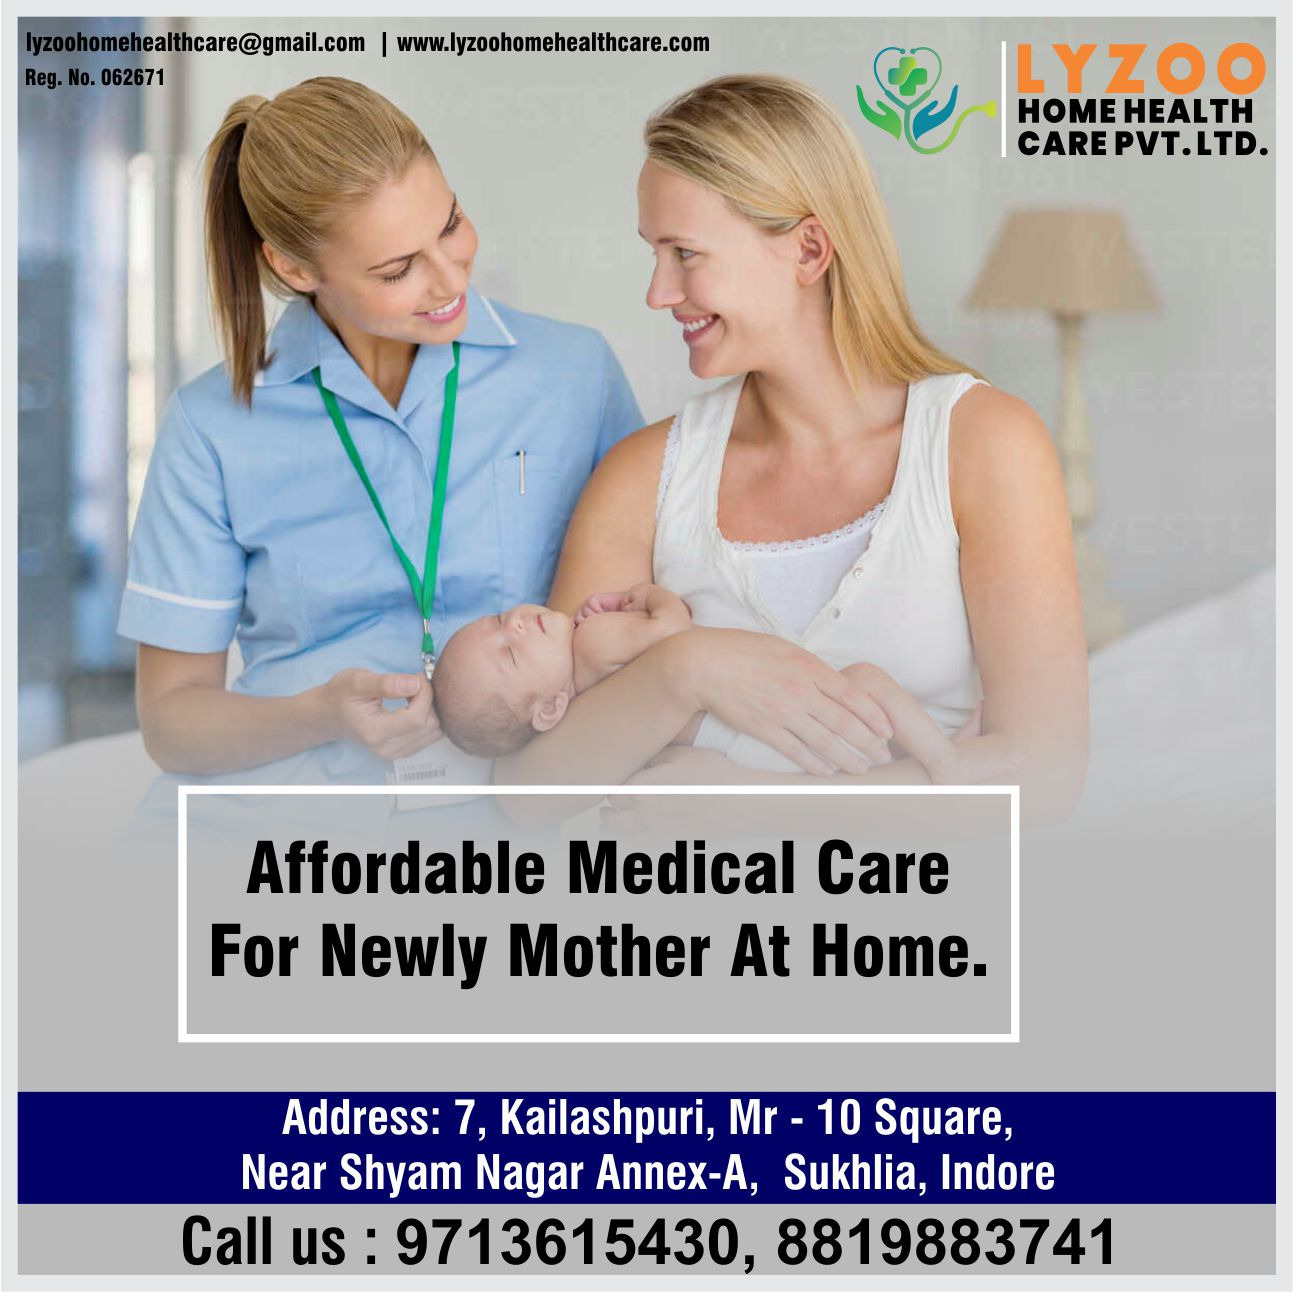 Best Home Healthcare Service for Newly Mother in Indore